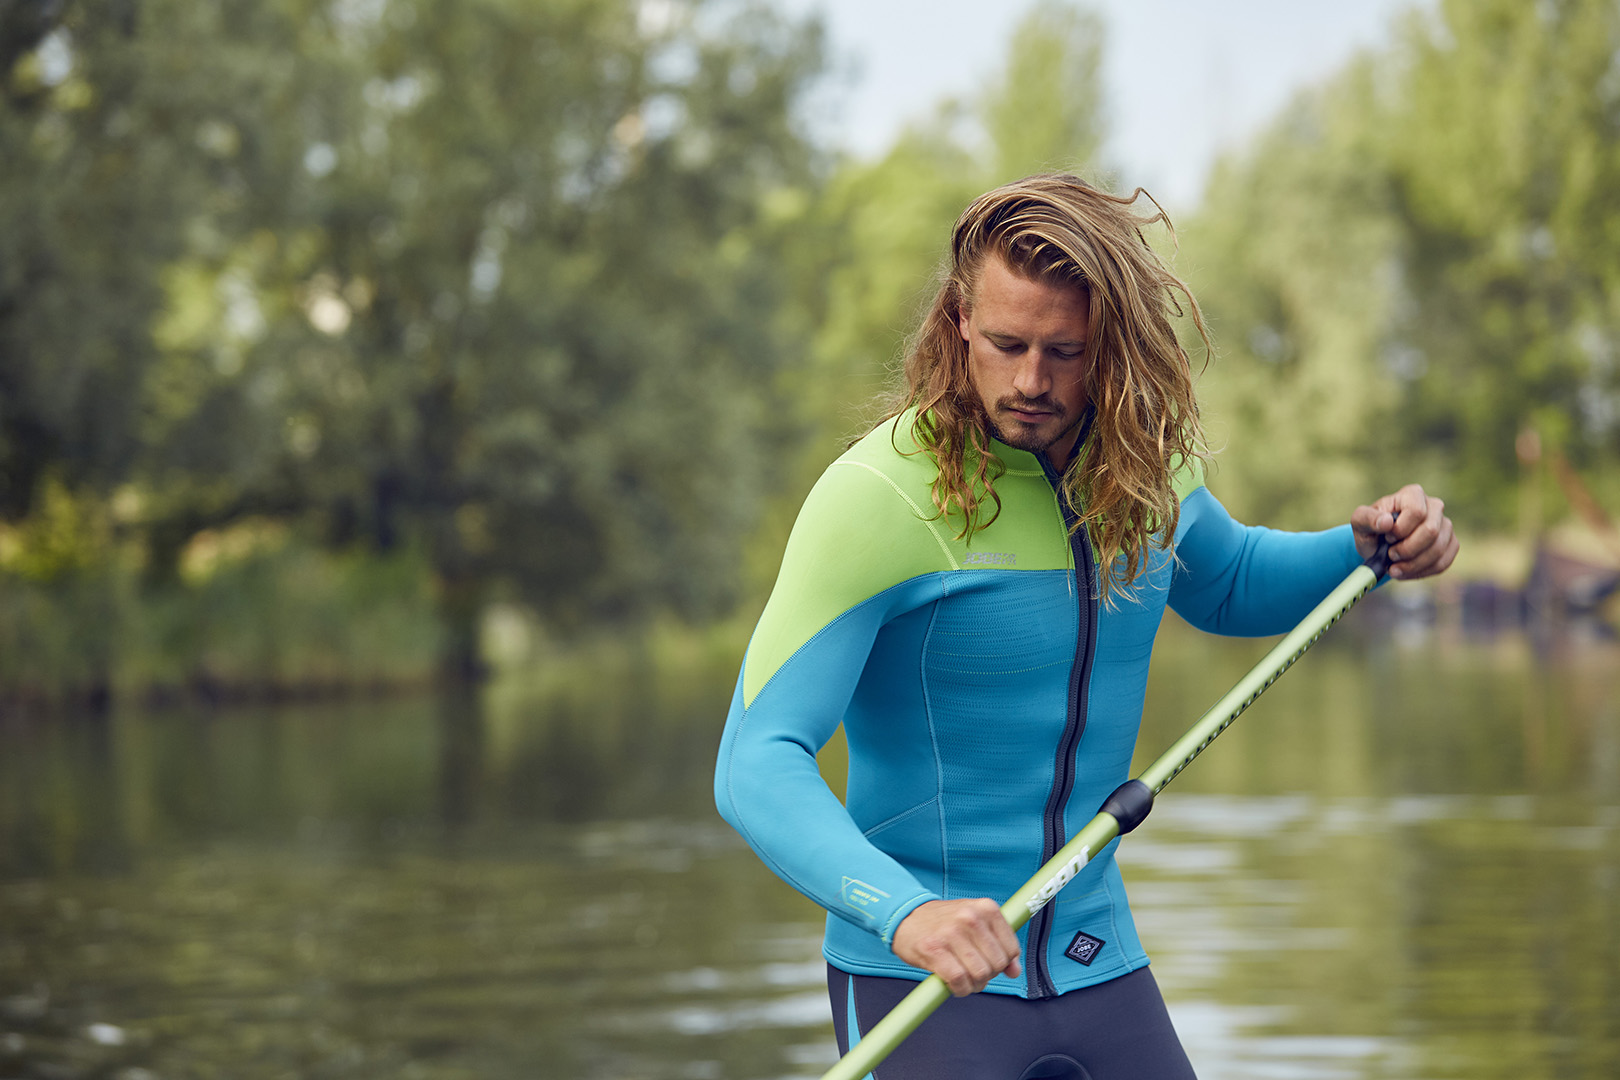 Looking for a good-looking SUP wetsuit? This is the Toronto.